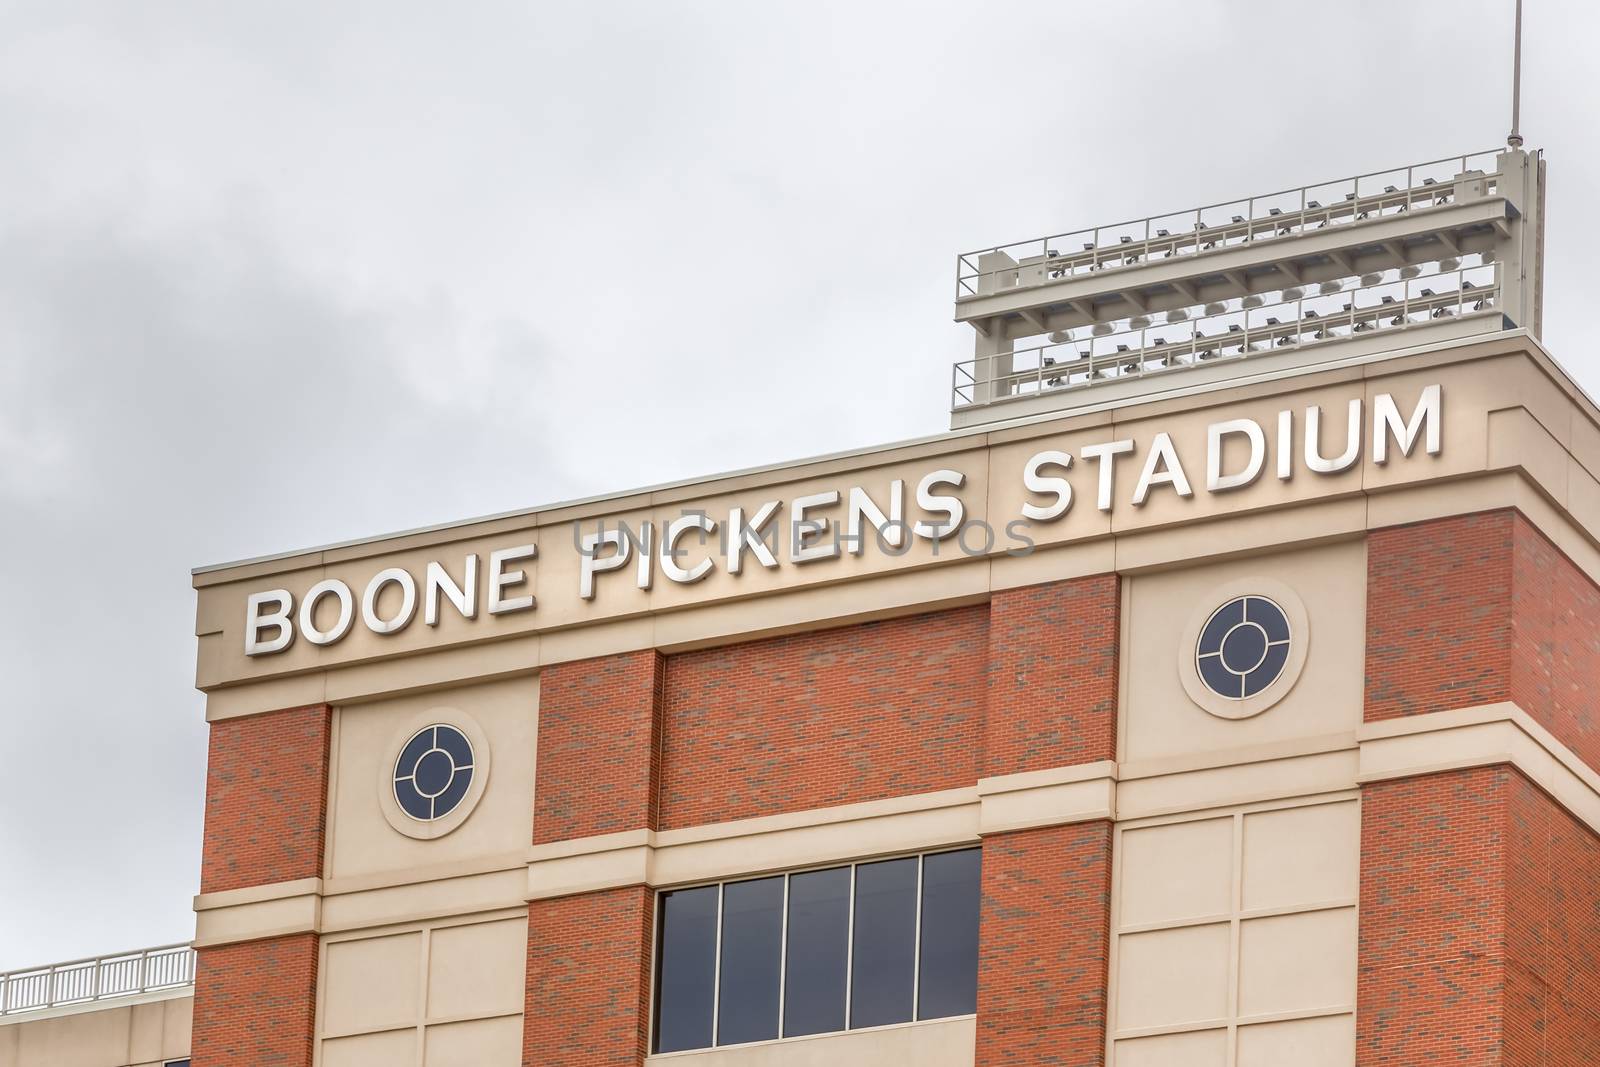 Boone Pickens Stadium 
at Oklahoma State University by wolterk